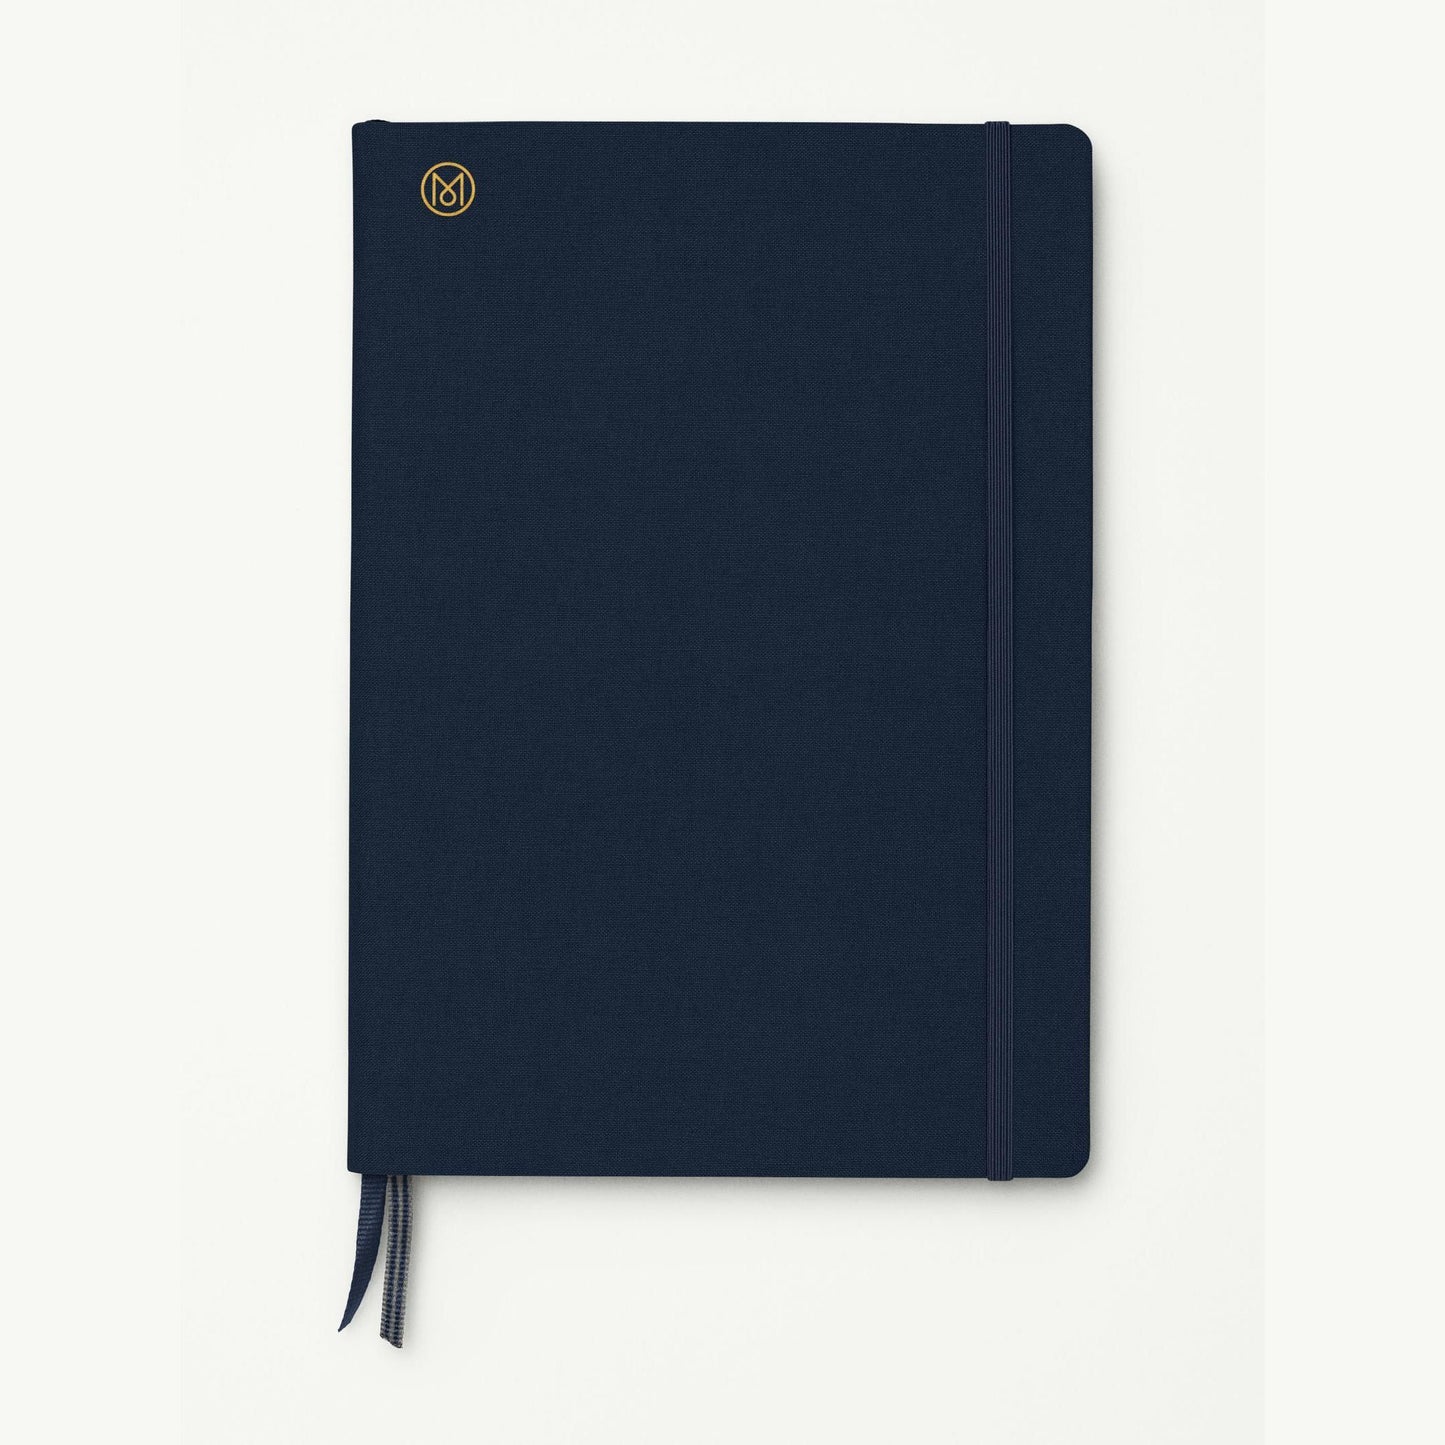 Monocle Softcover Notebook B5 - Navy